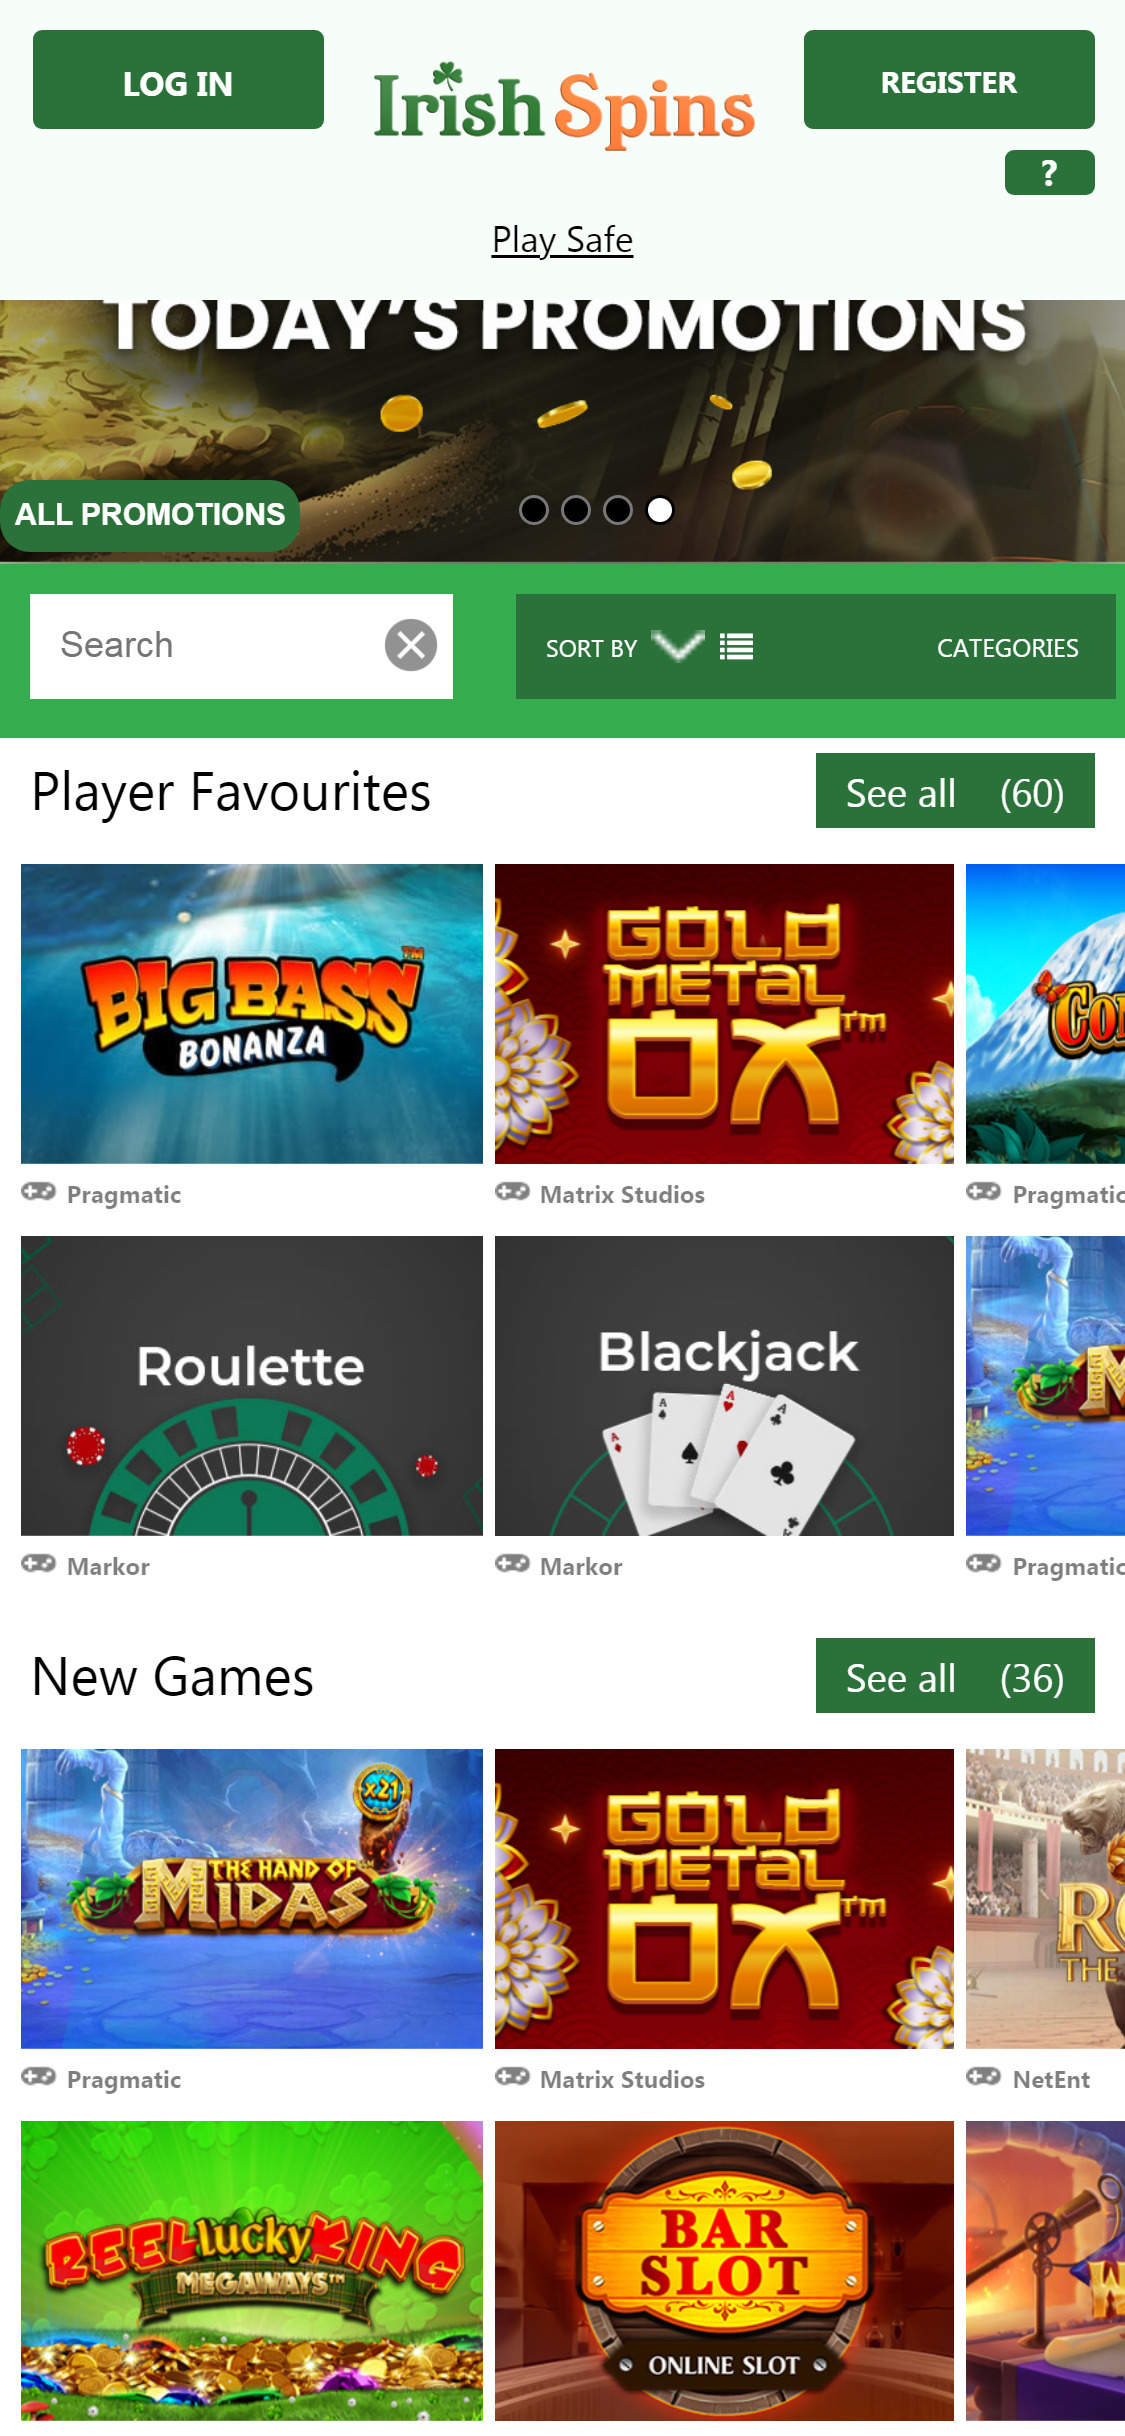 Irish Spins Casino Mobile Games Review